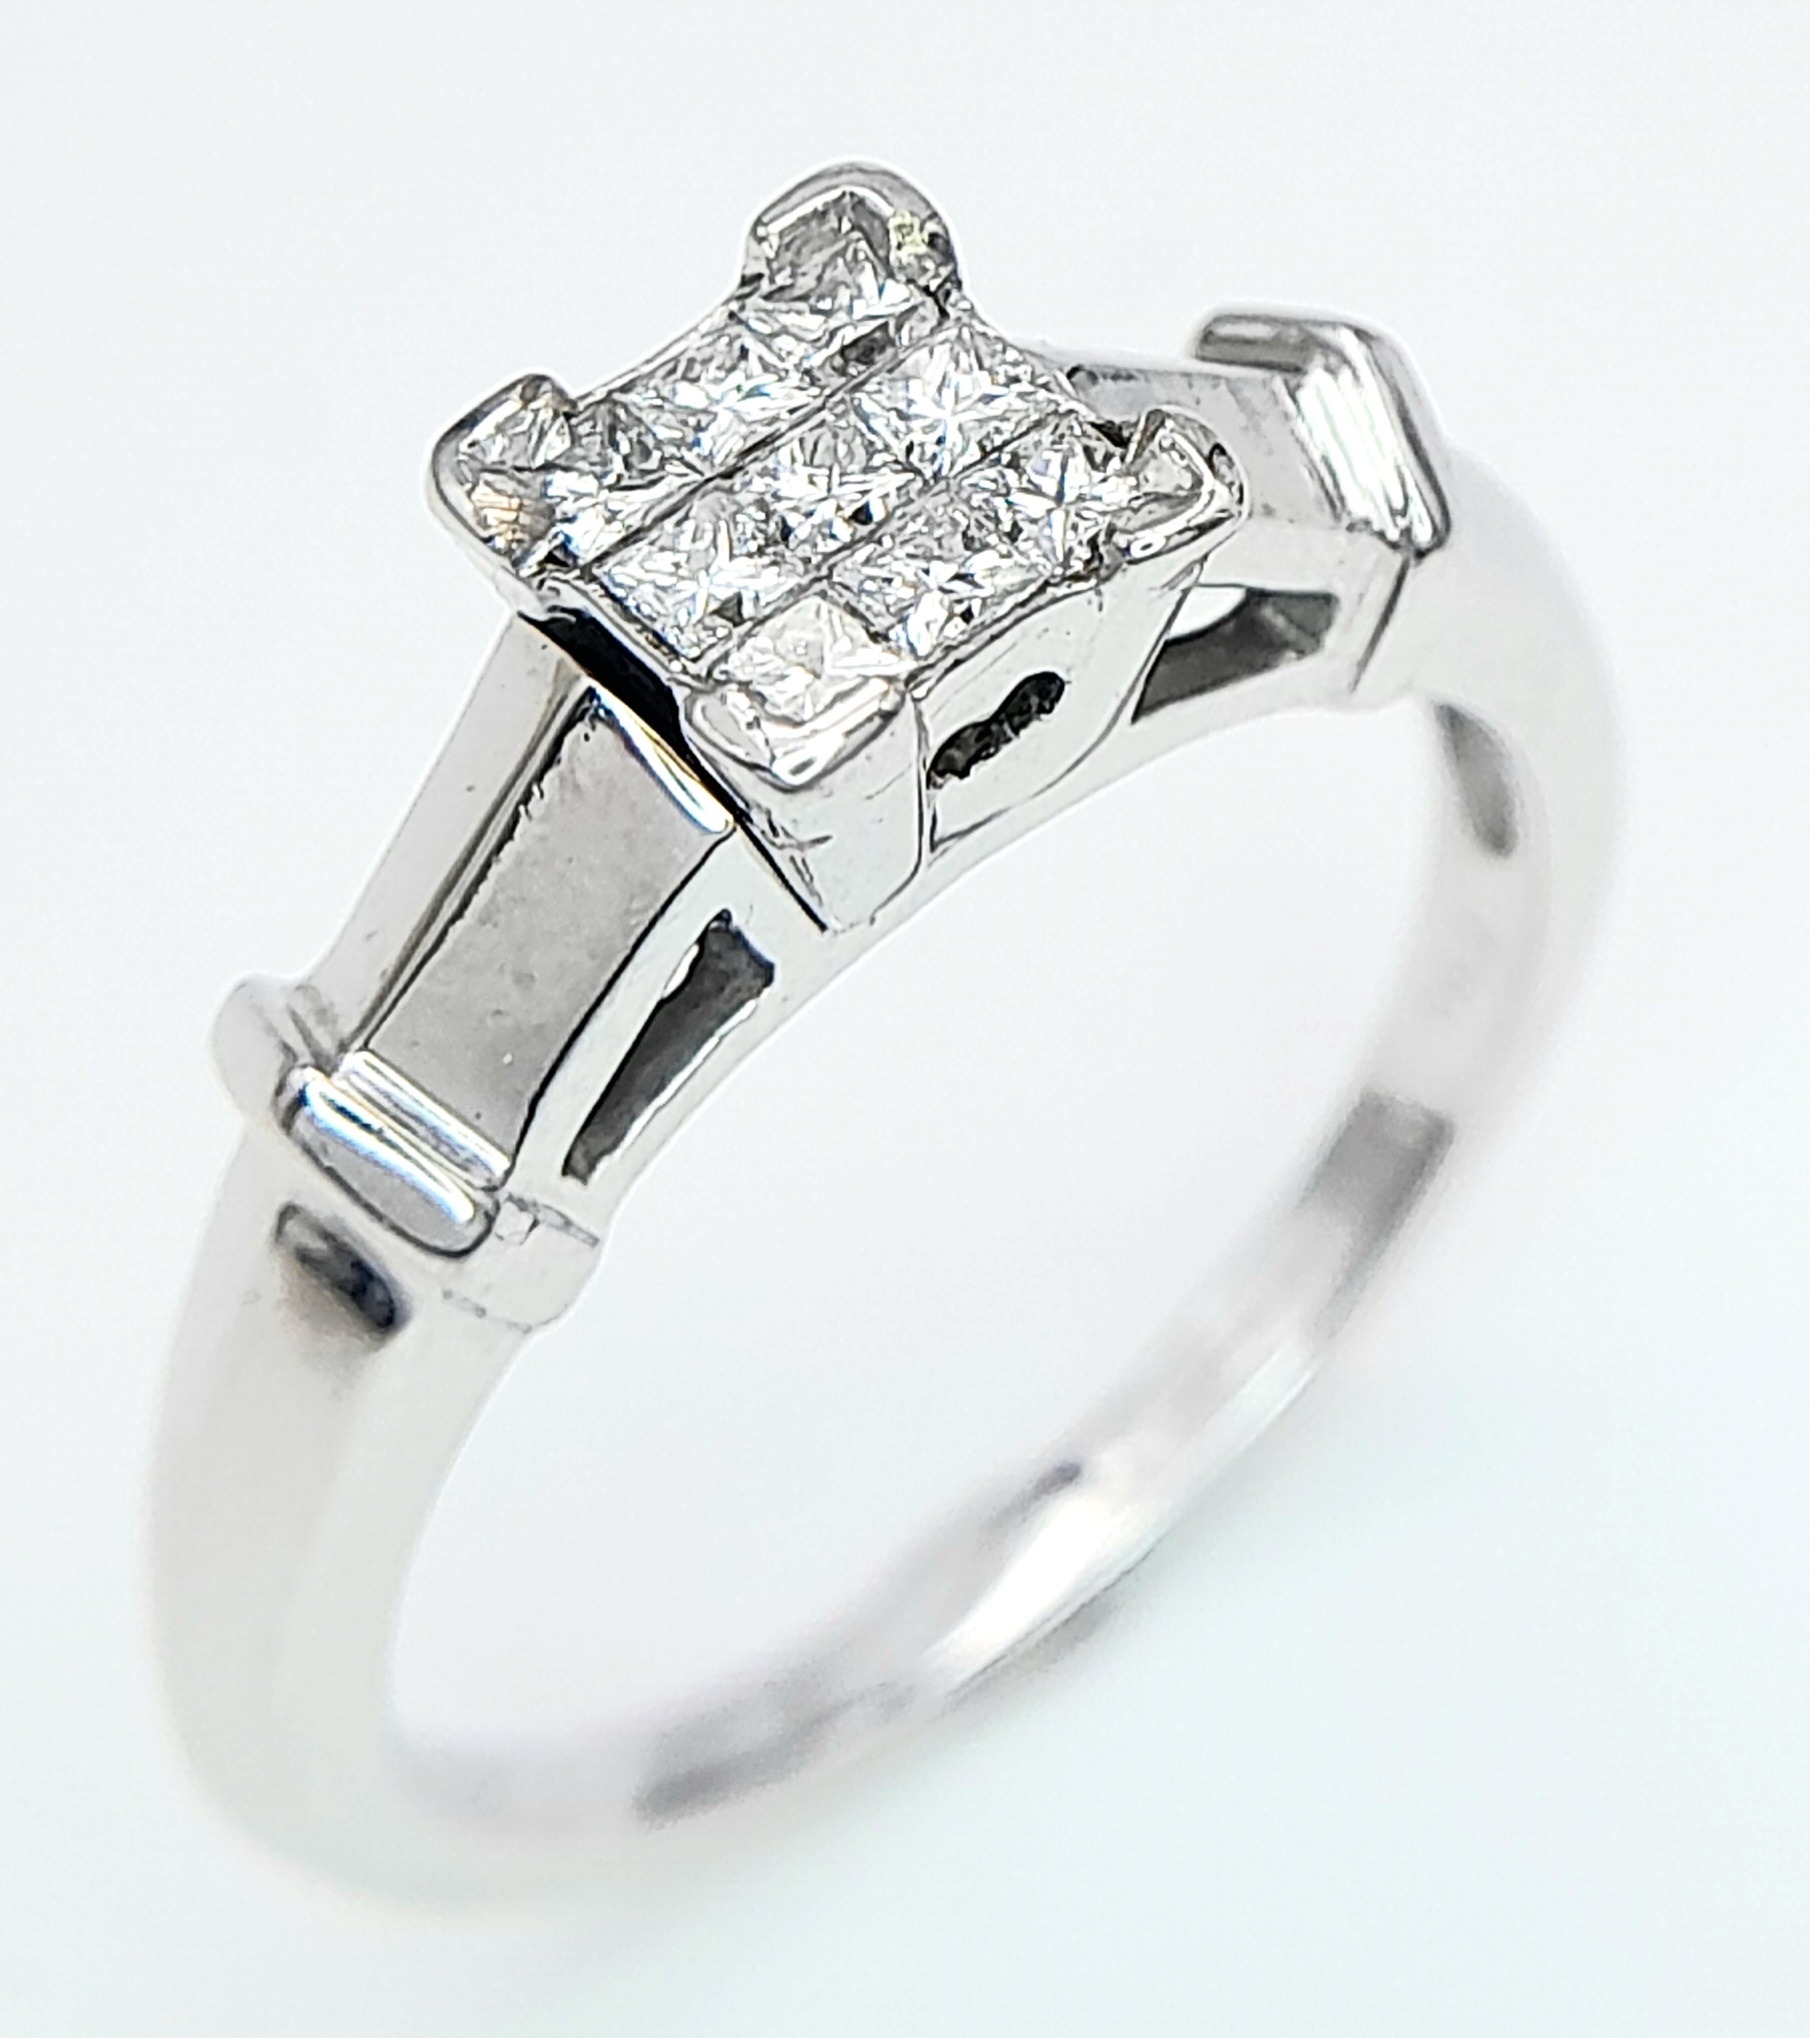 AN 18K WHITE GOLD DIAMOND RING. 0.25ctw, Size M, 5.1g total weight. Ref: SC 8067 - Image 4 of 6